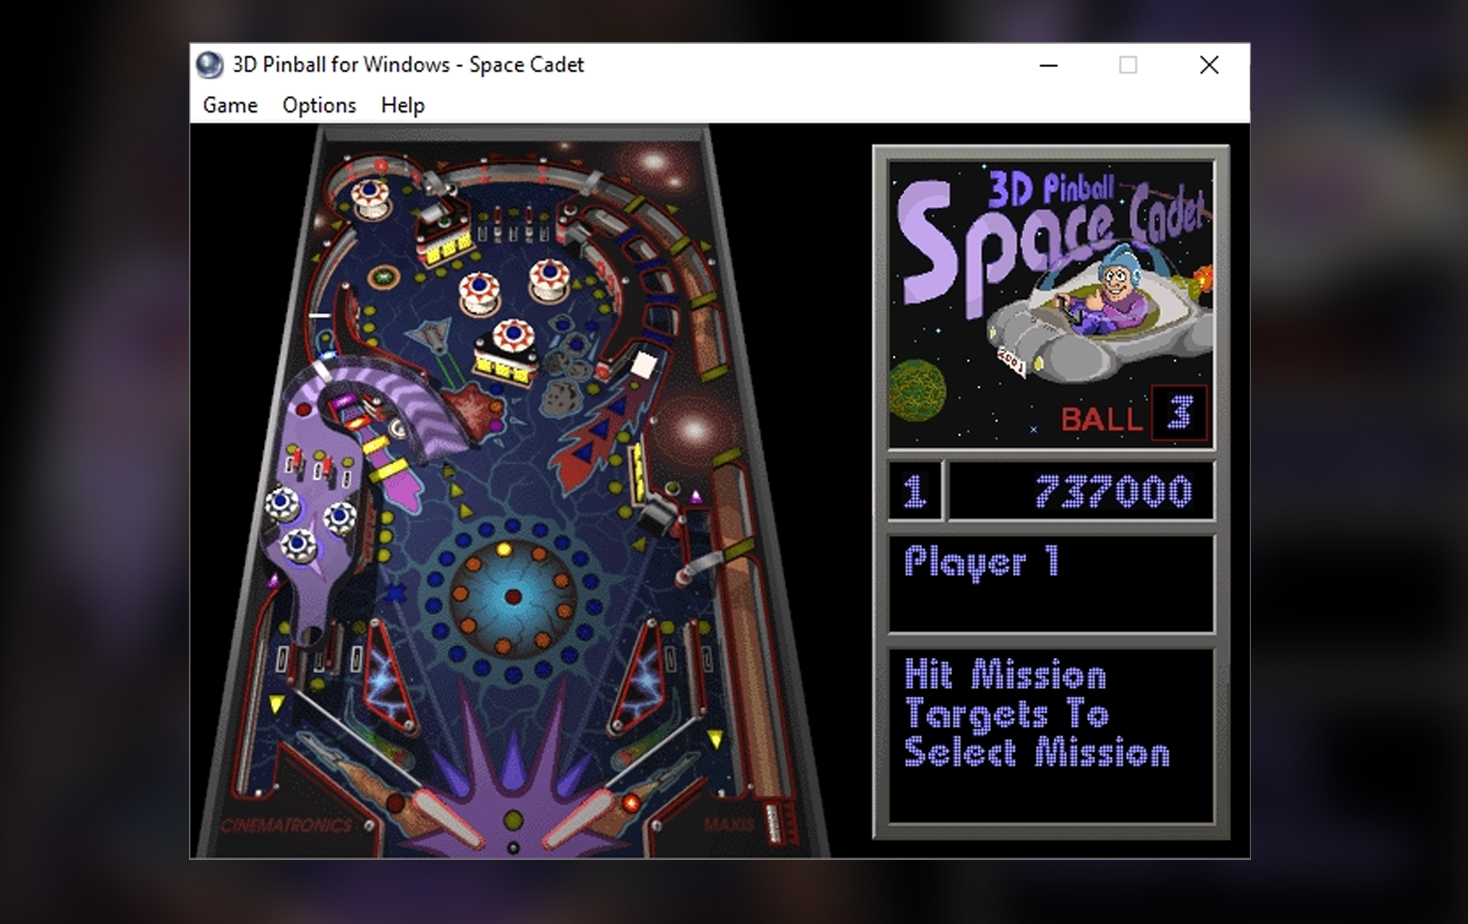 3d pinball space cadet instant game over